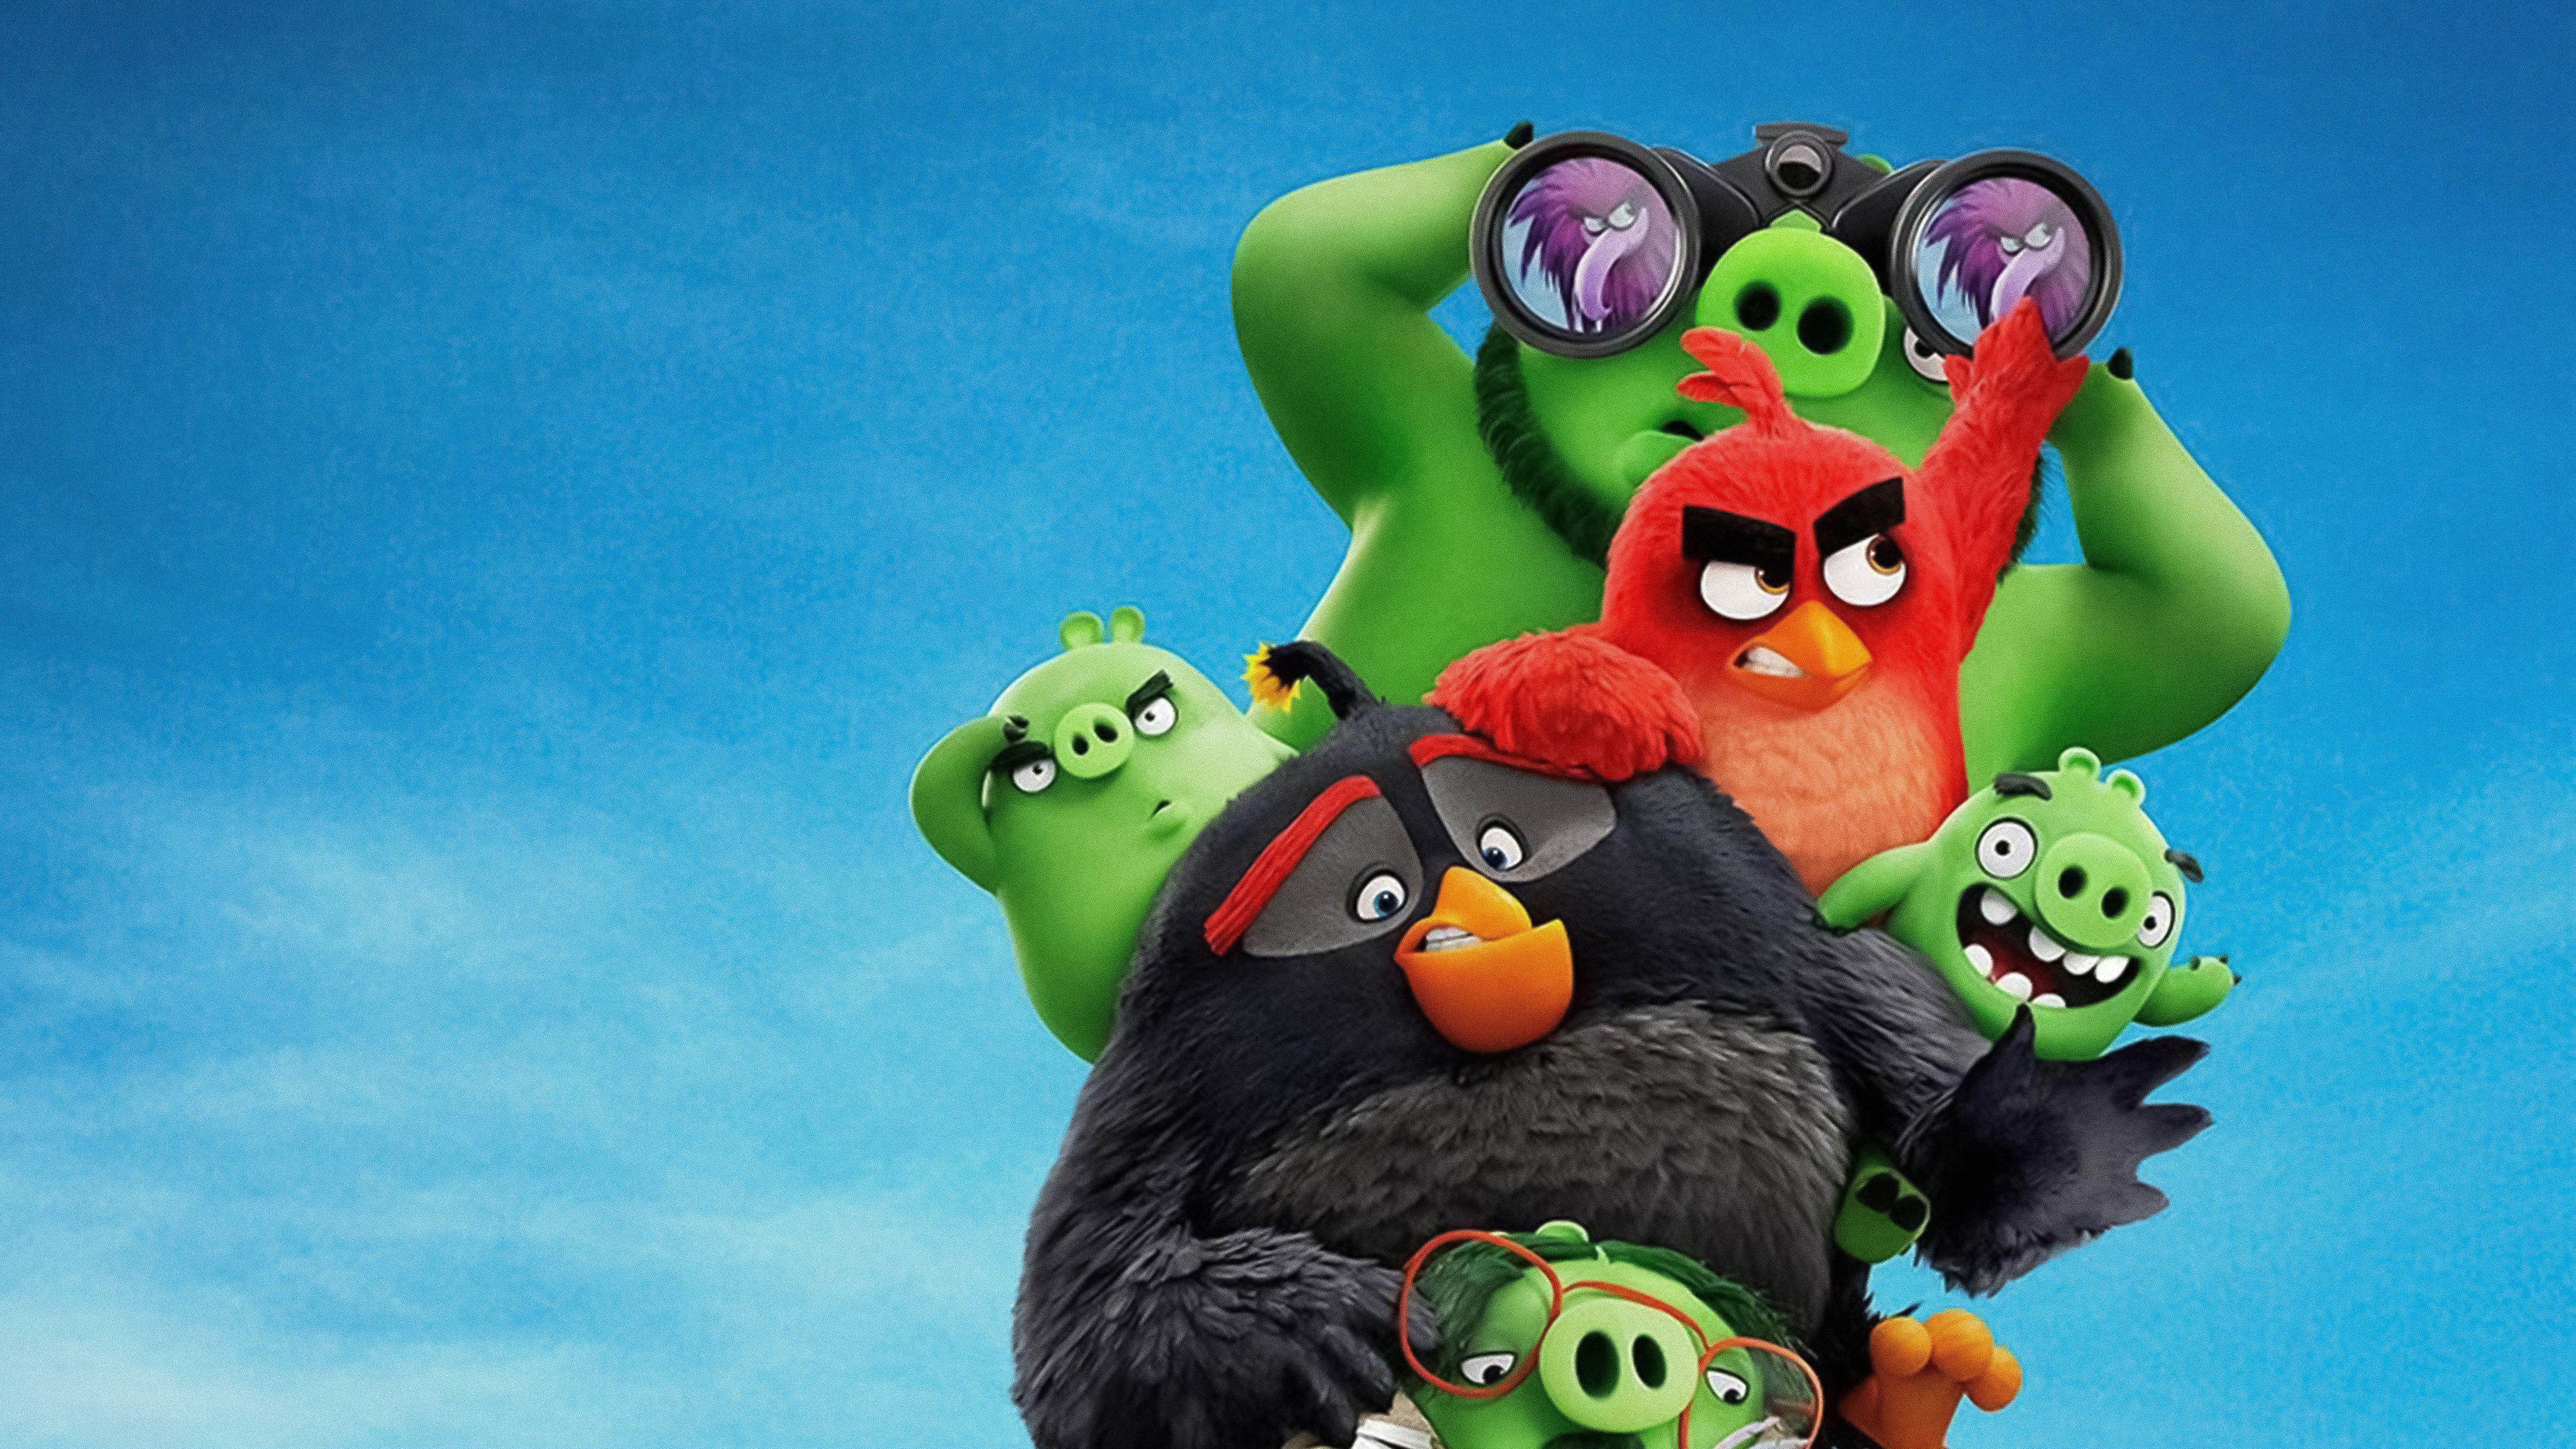 The Angry Birds Movie 2 Wallpaper Free The Angry Birds Movie 2 Background